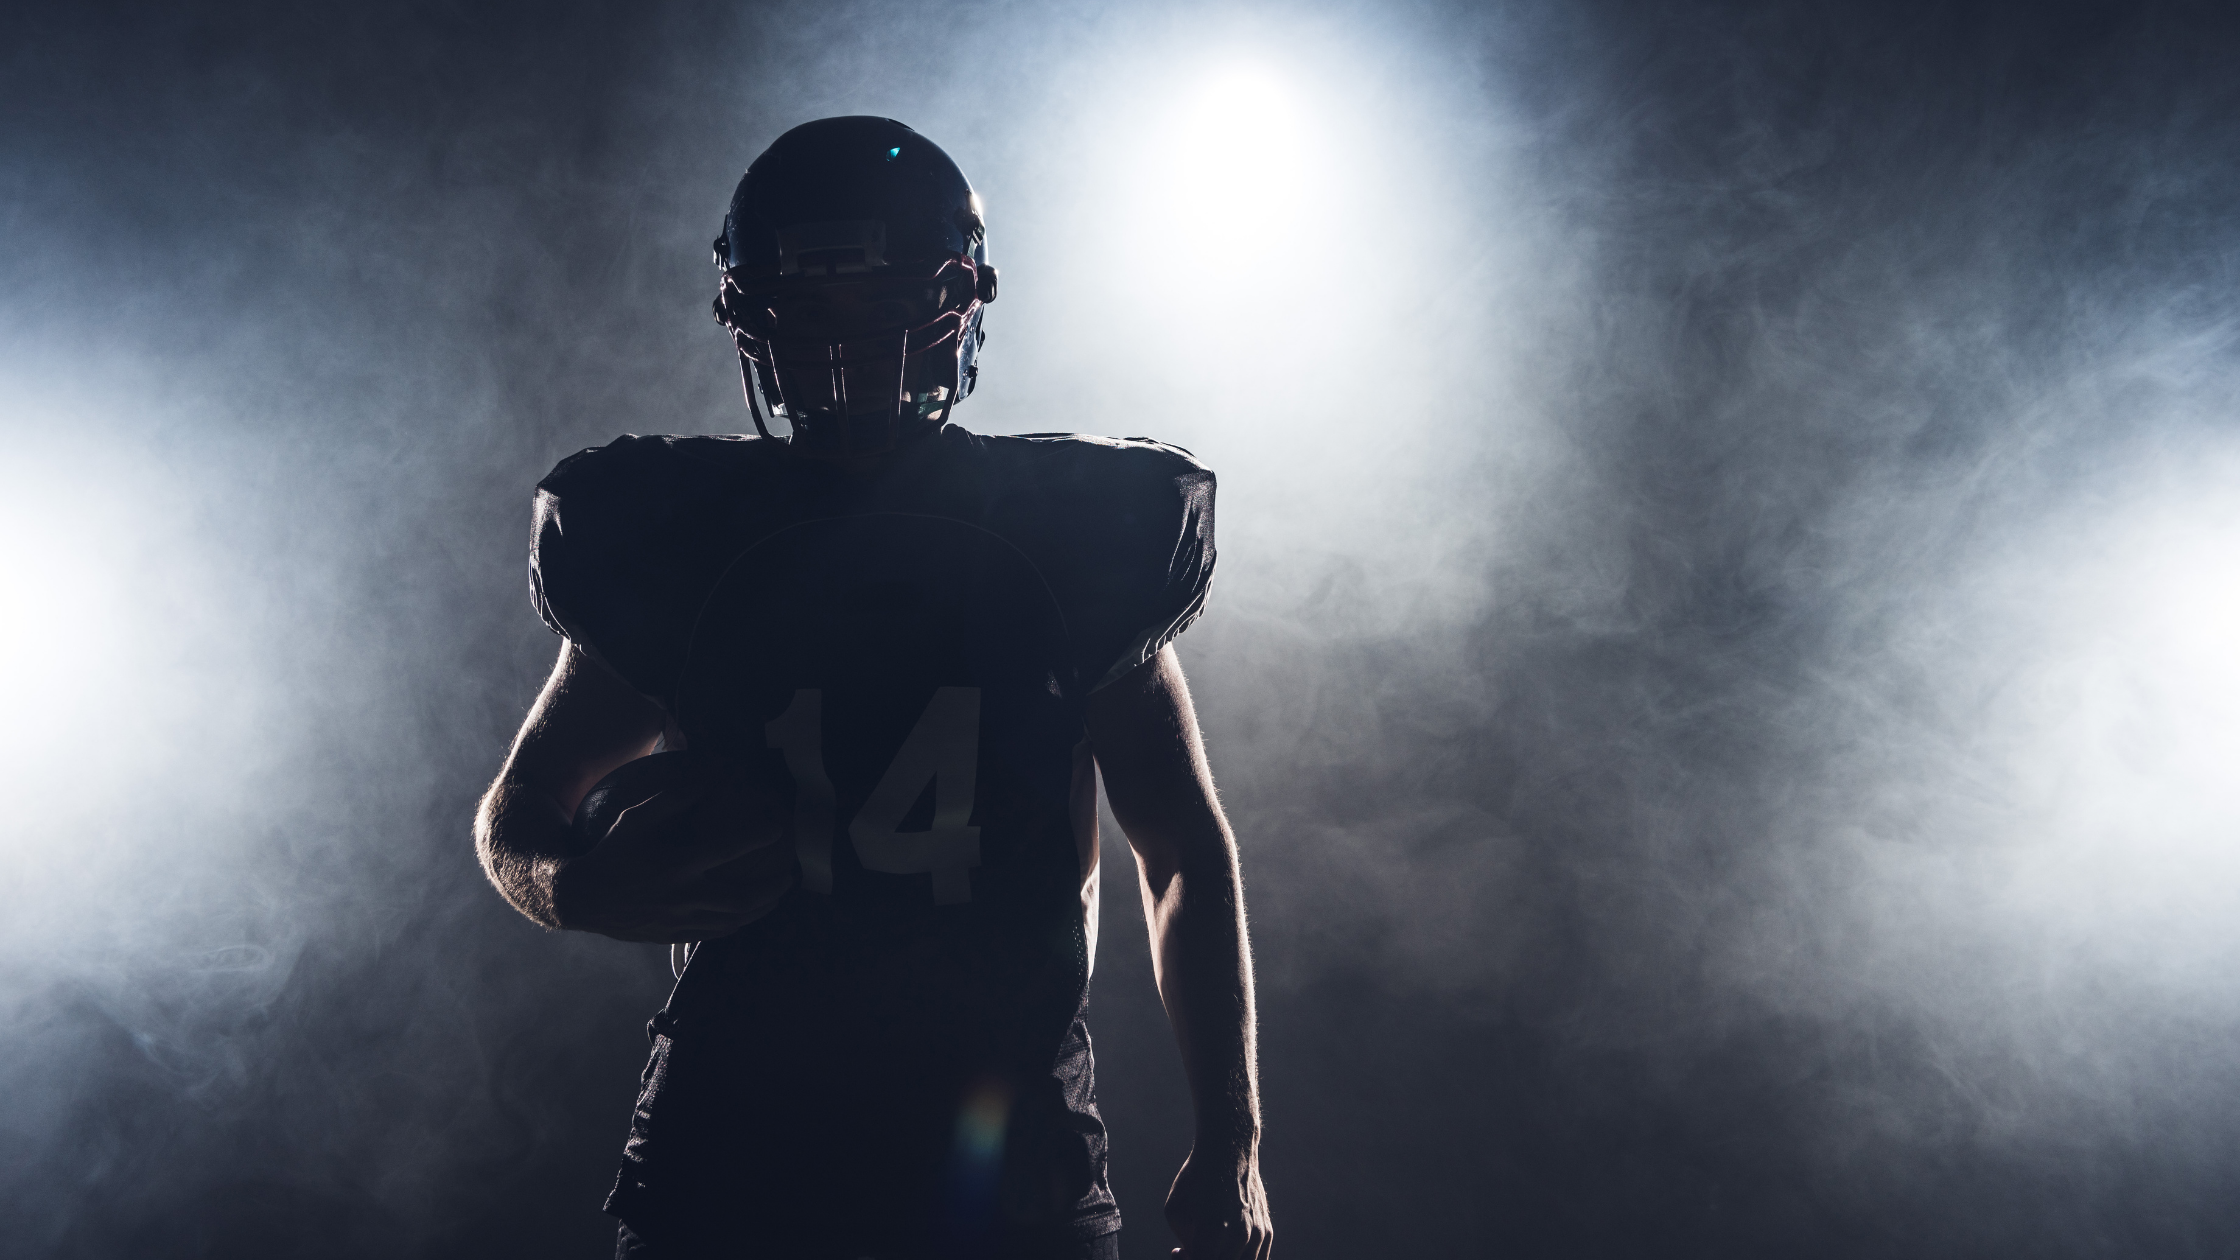 The silhouette of a football plater is surrounded in a thing smoke, shielding his features. He cradles a ball in his left arm.